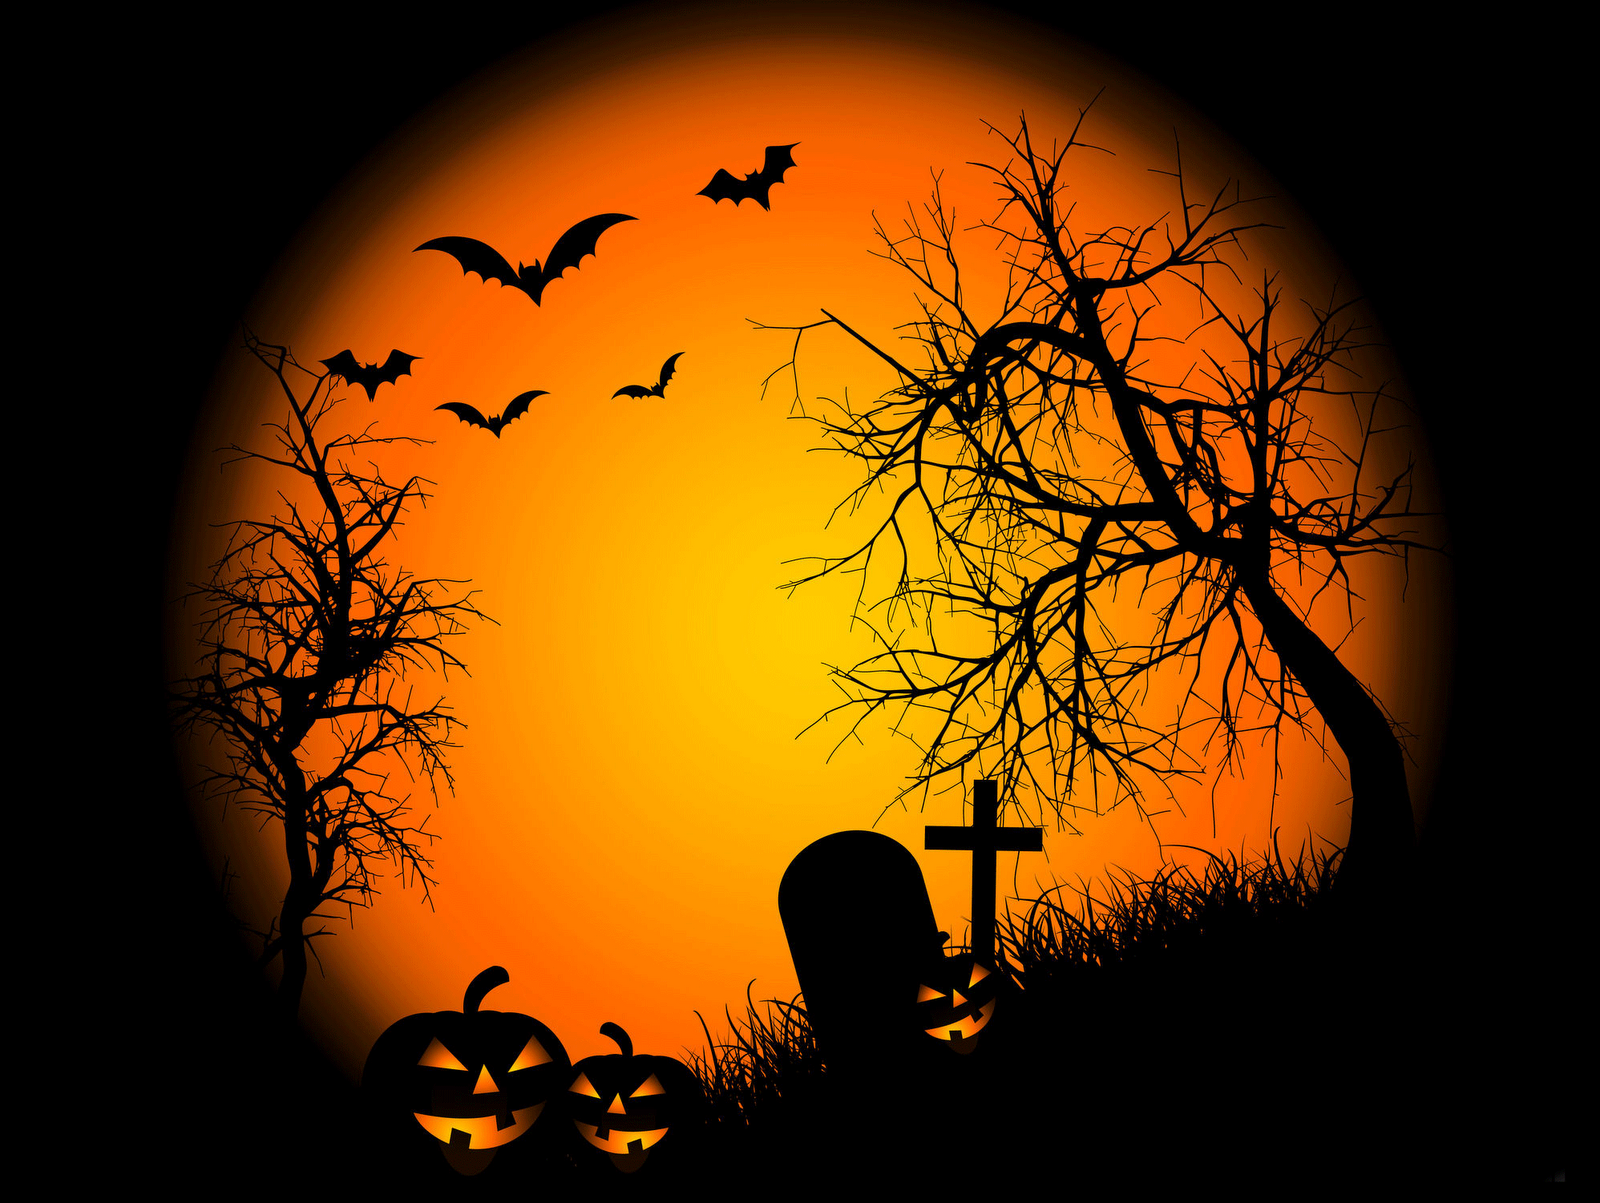 Halloweeen Background. Halloweeen Background, Halloweeen Streamers Background and